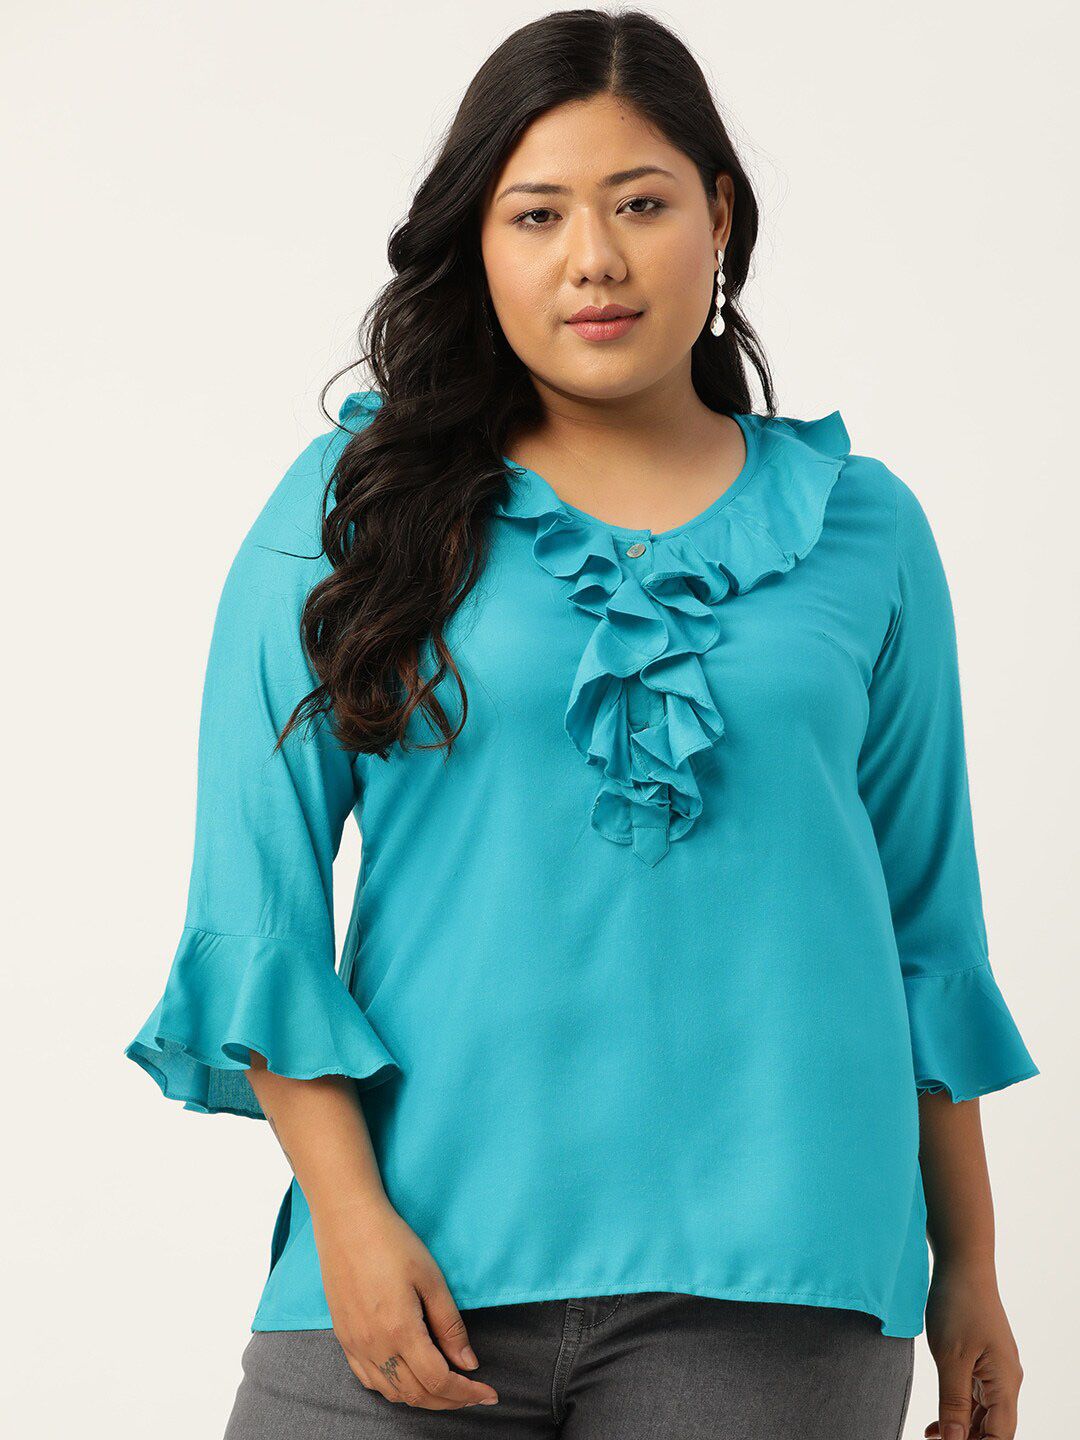 theRebelinme Plus Size Teal Ruffles Top Price in India